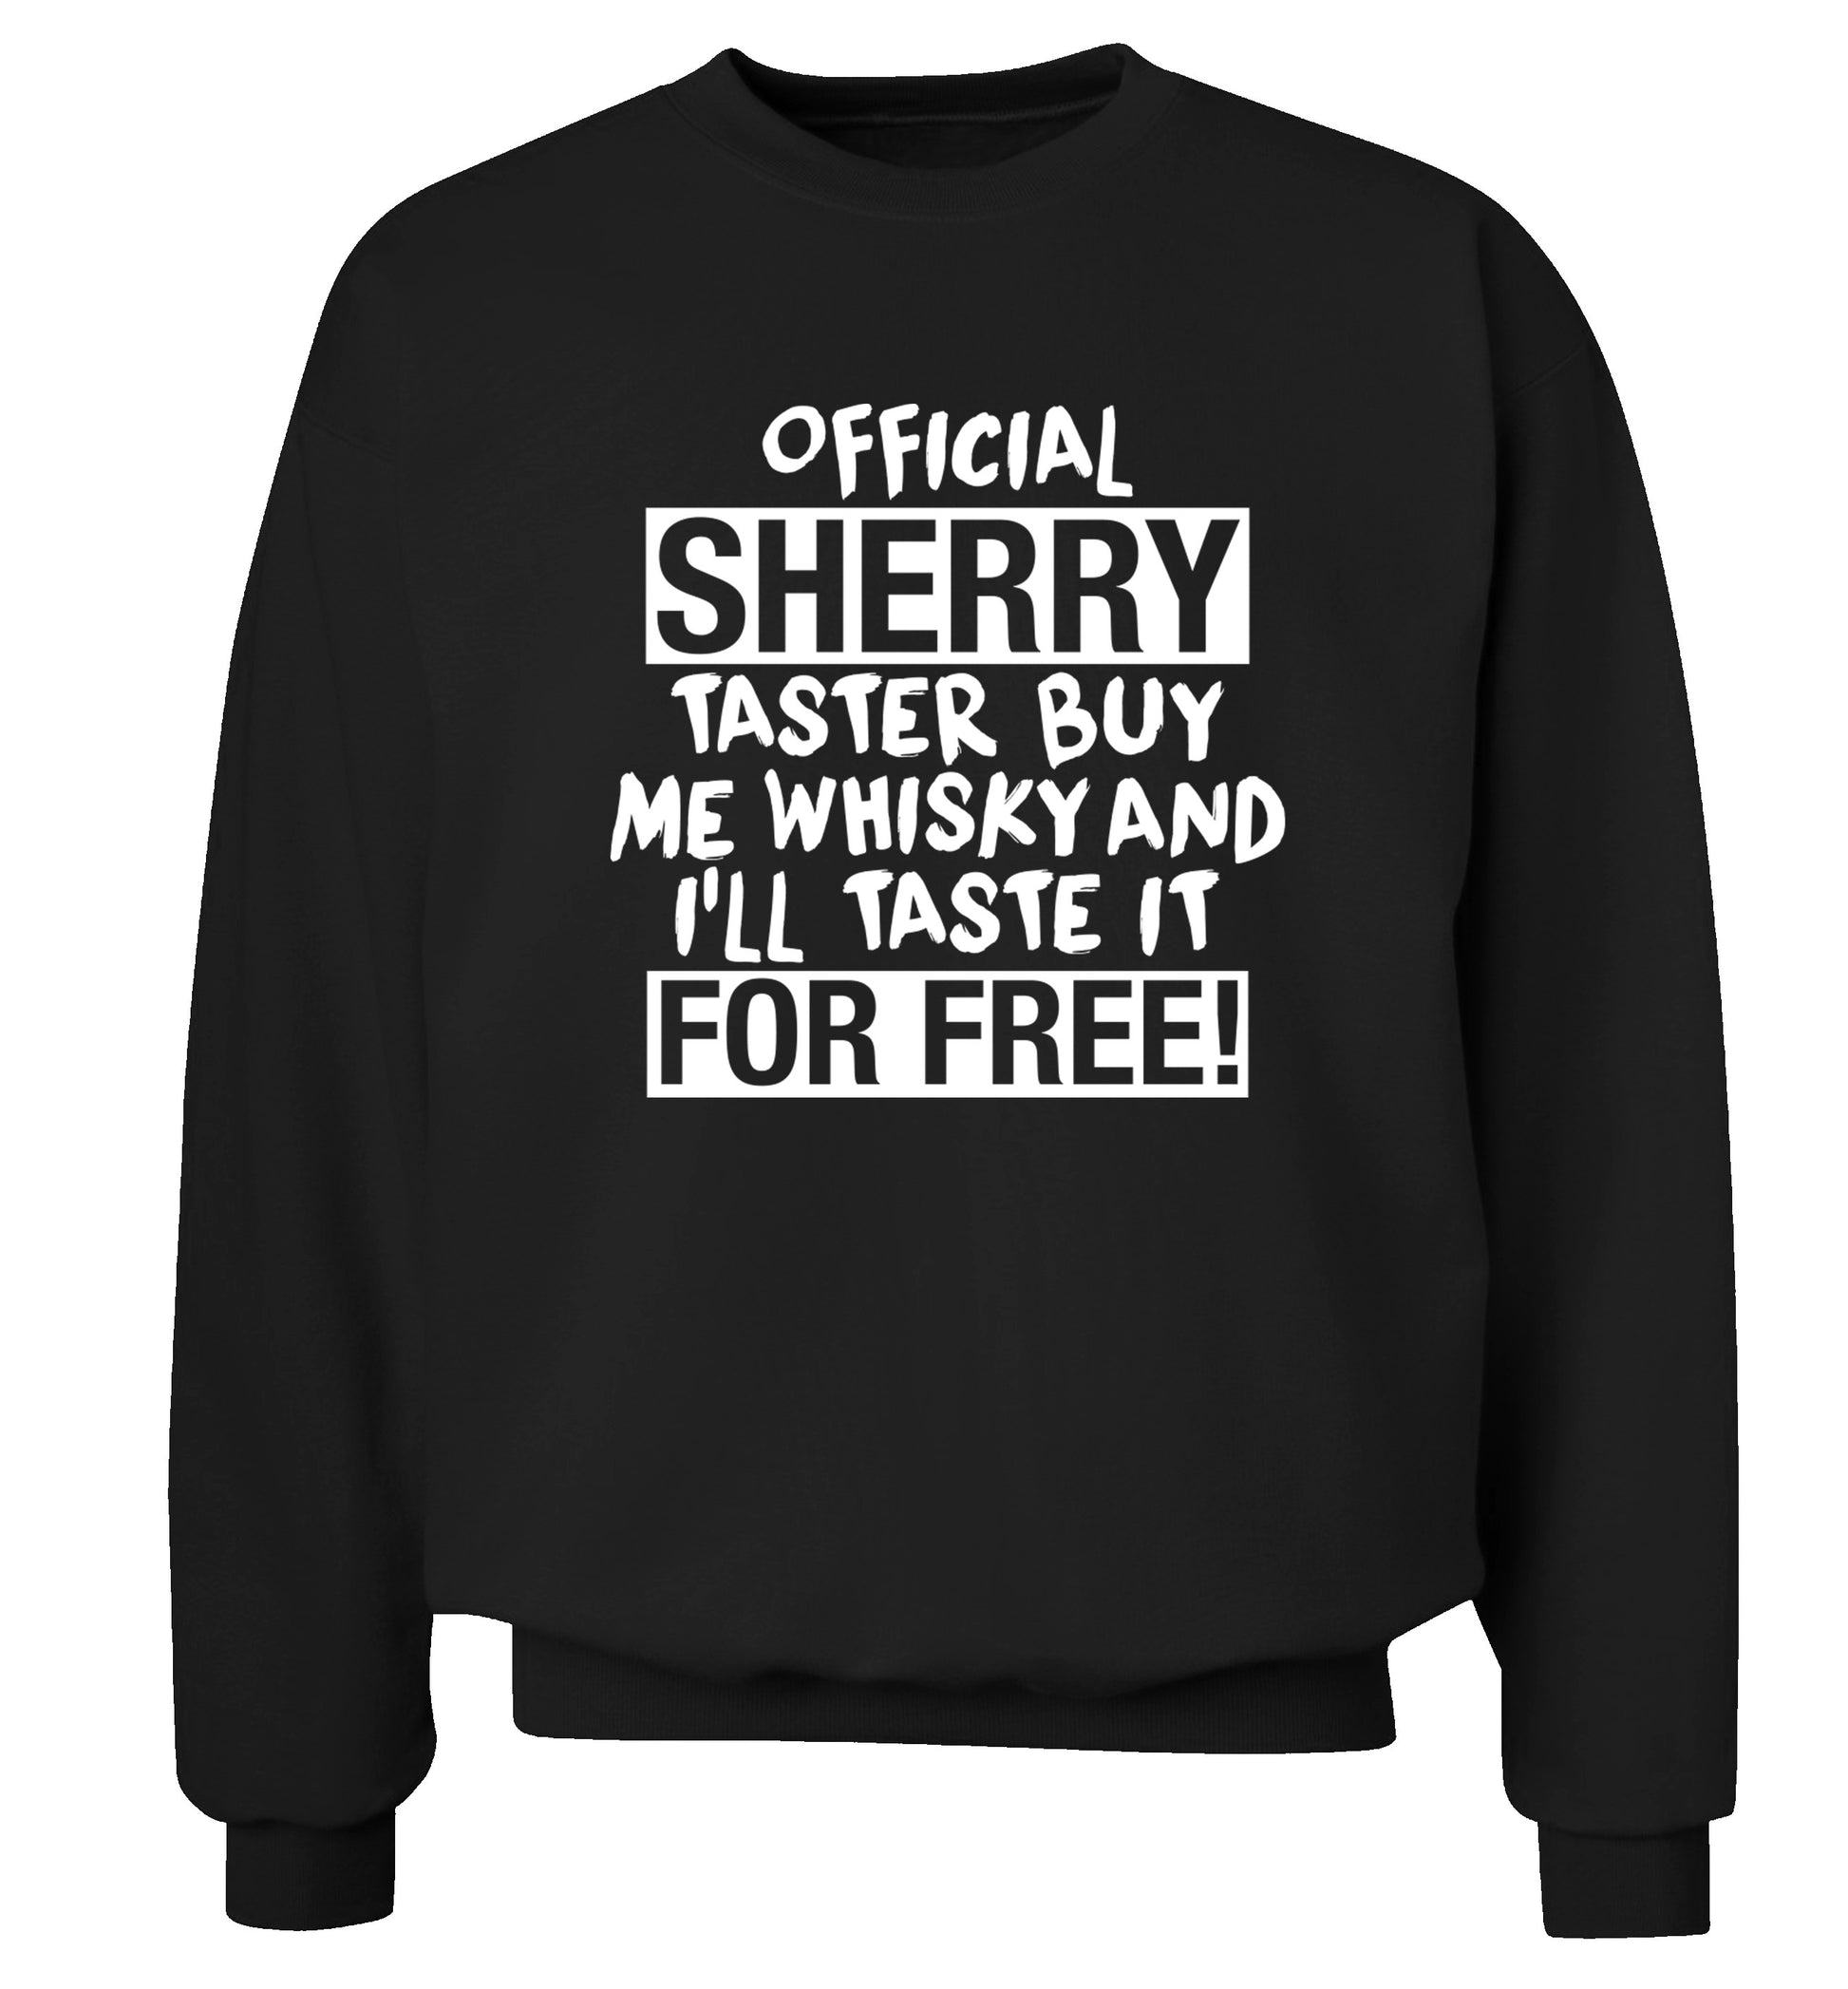 Official sherry taster buy me sherry and I'll taste it for free Adult's unisex black Sweater 2XL